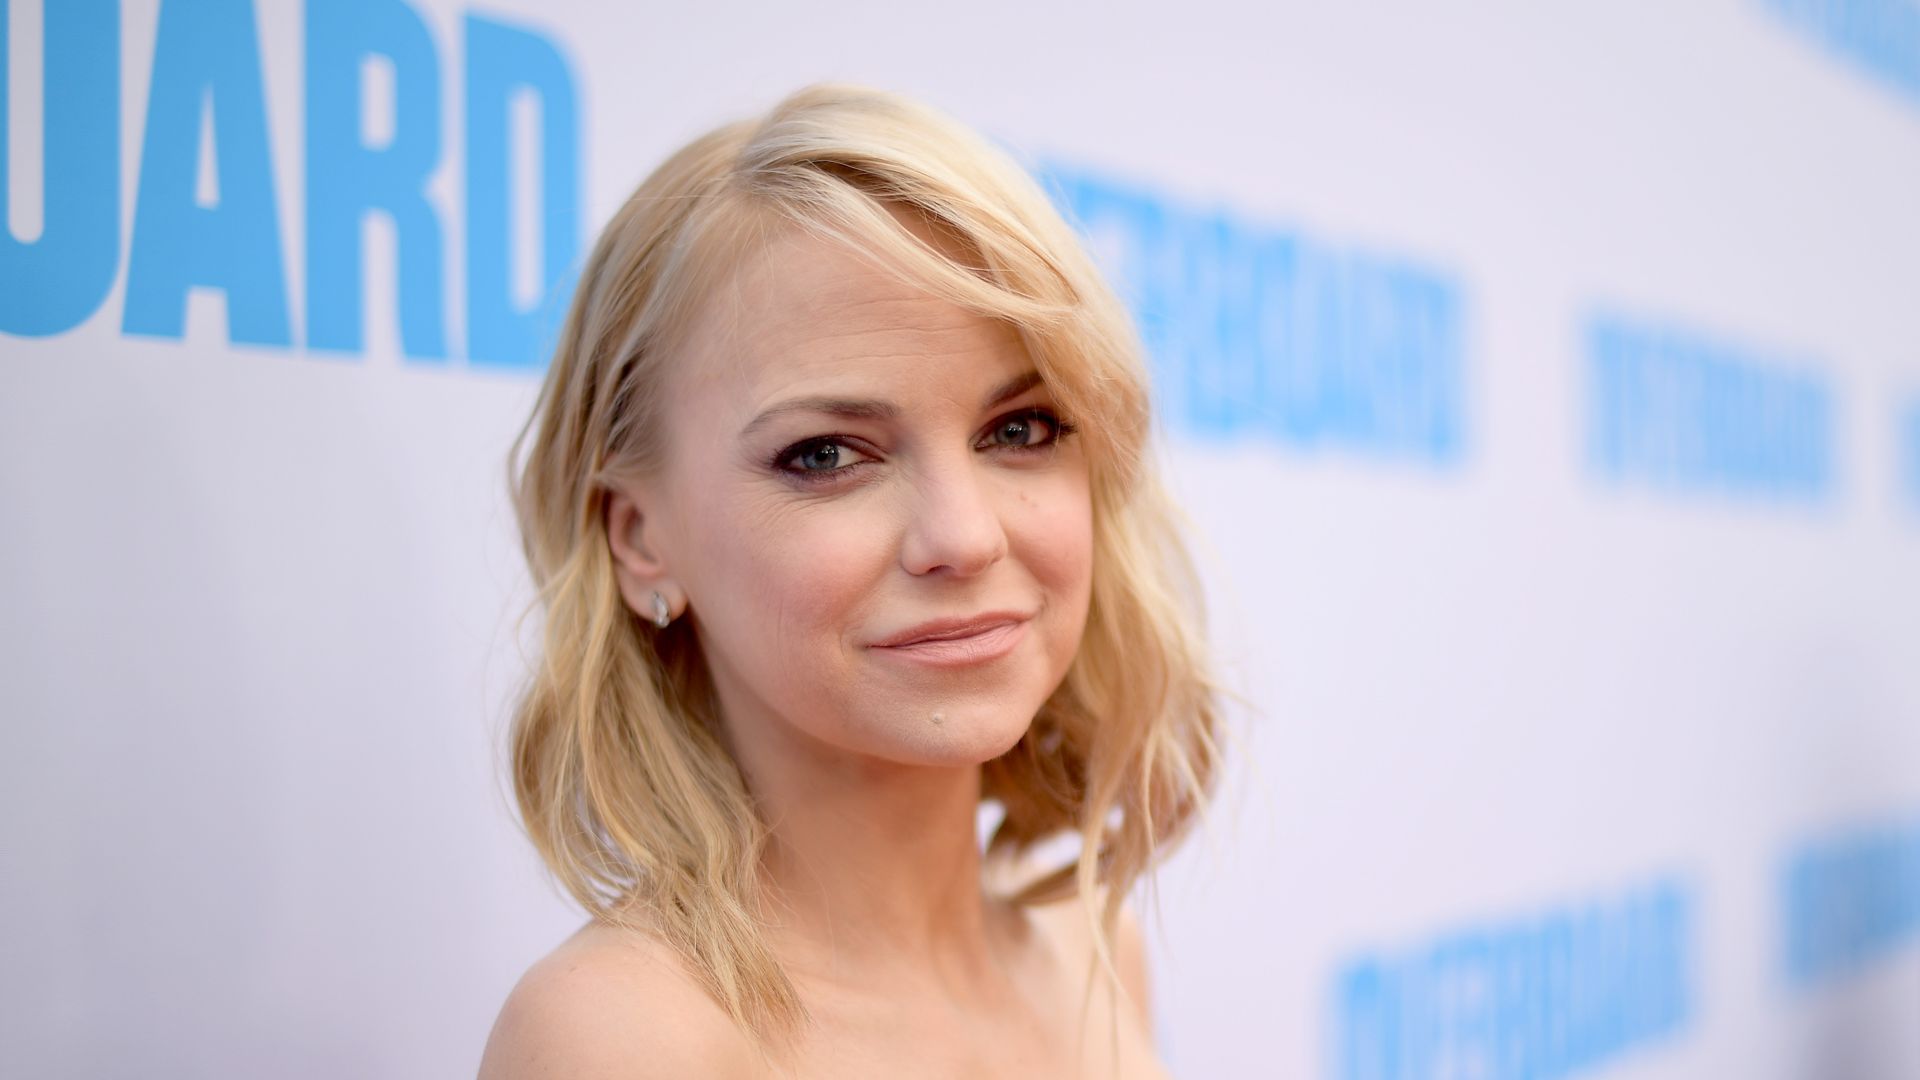 Anna Faris' surprising transformation through the years will make you double take